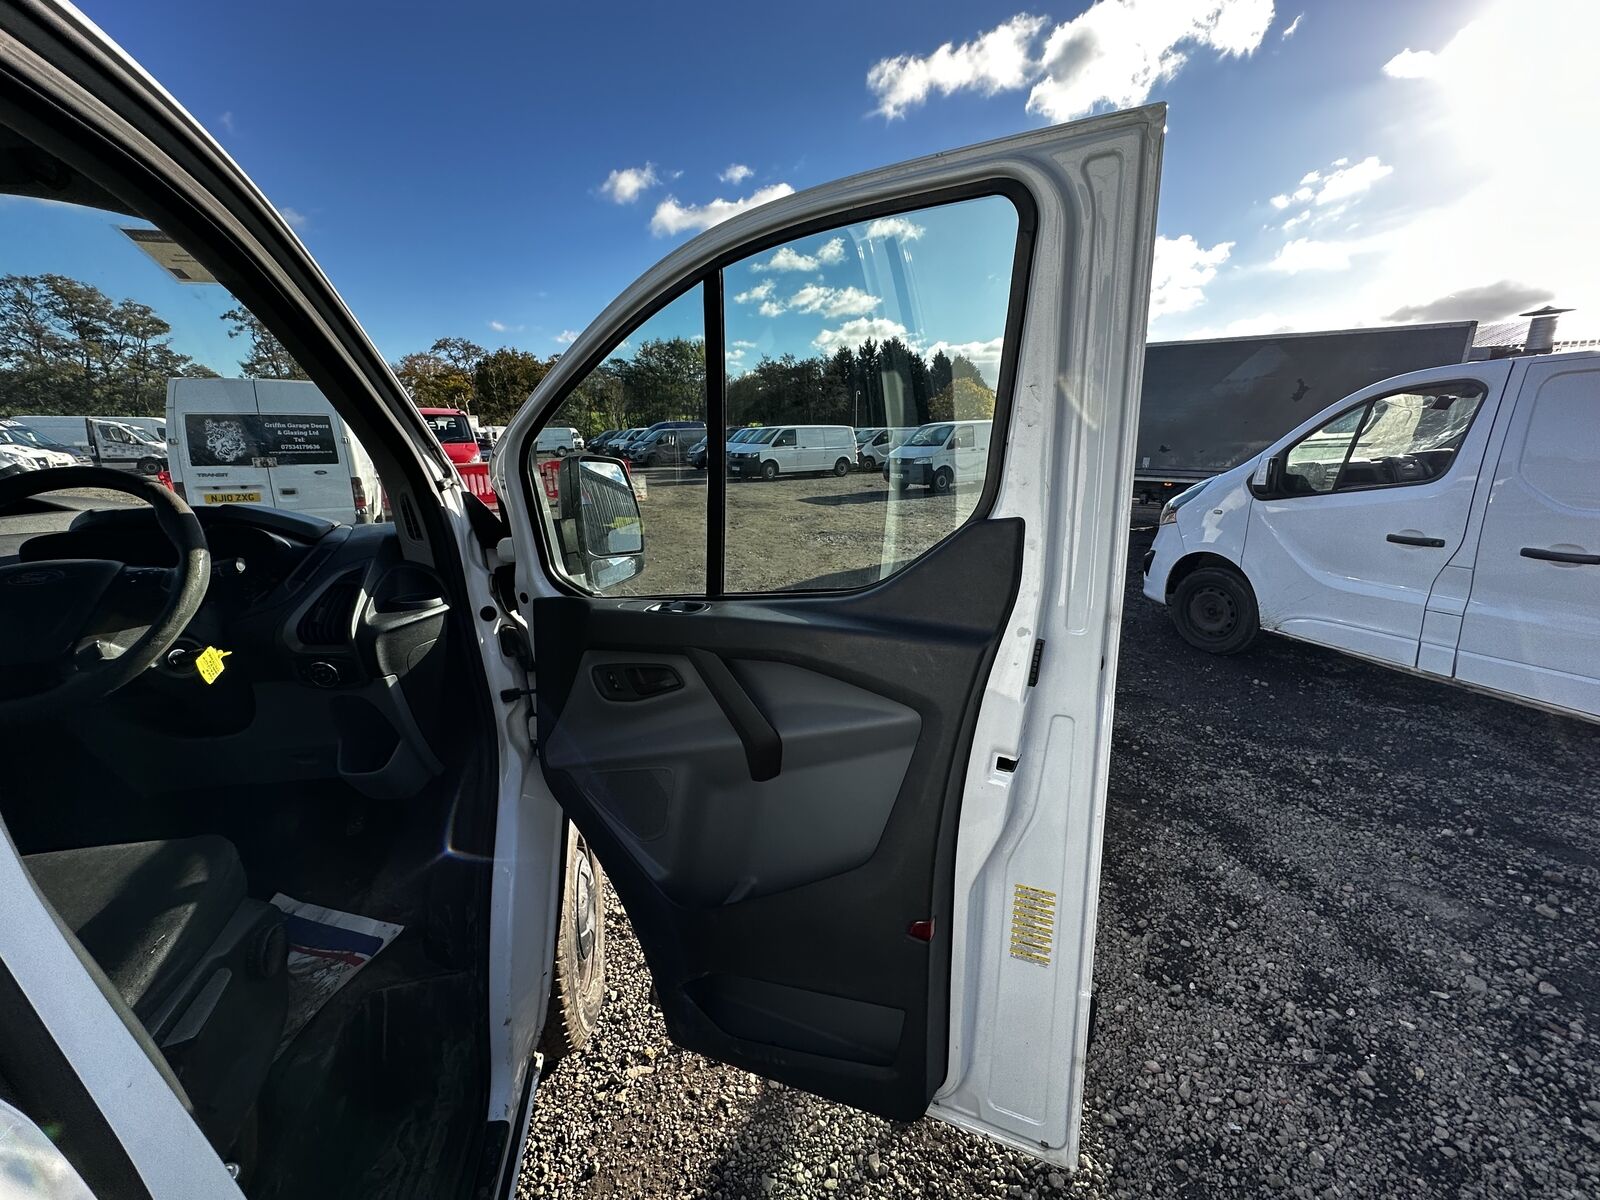 Bid on AFFORDABLE WORKHORSE: 2014 FORD TRANSIT CUSTOM 270 L1 LOW ROOF- Buy &amp; Sell on Auction with EAMA Group